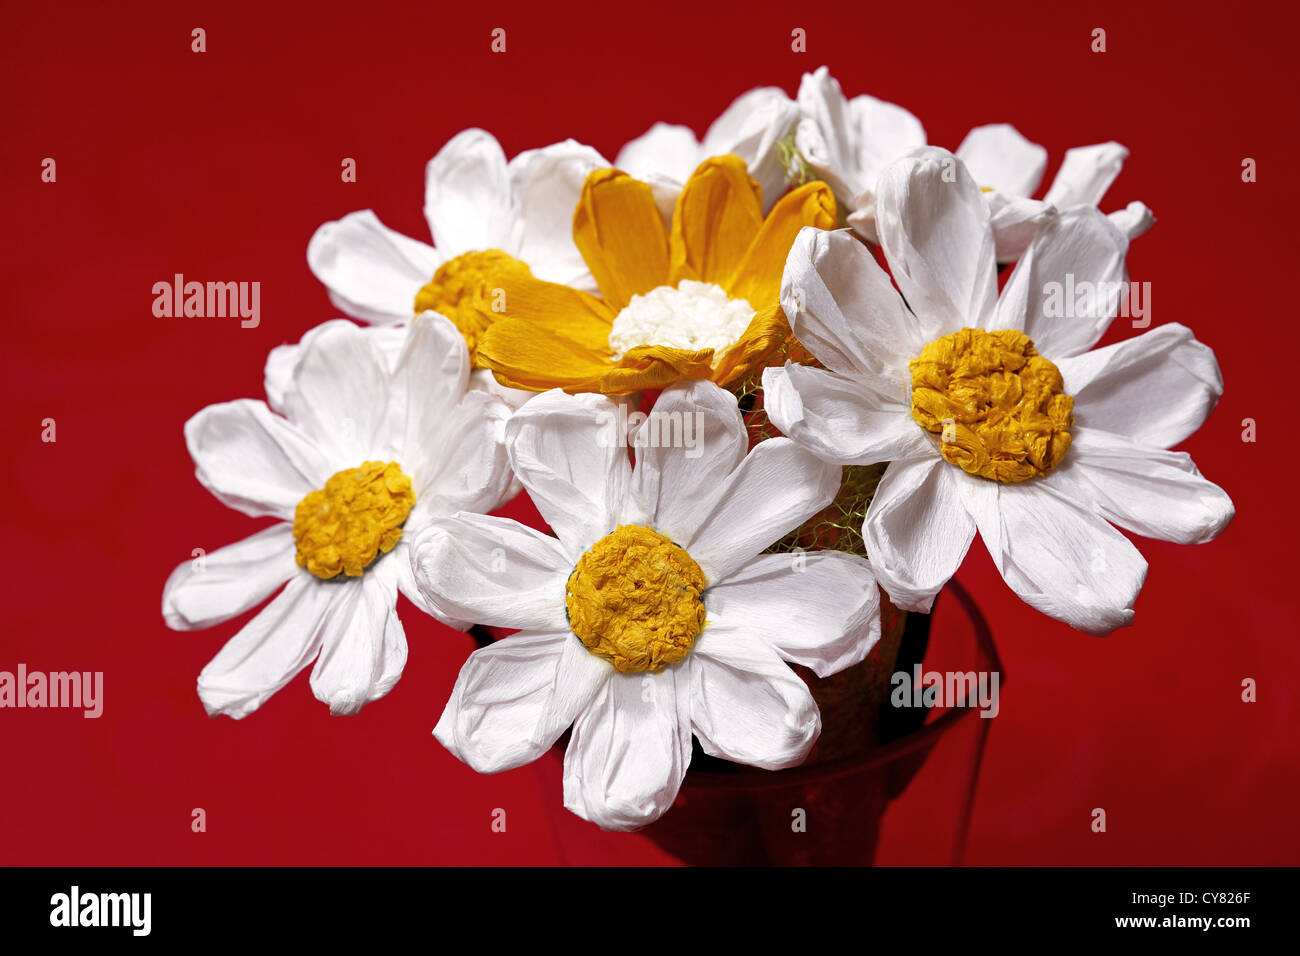 Bouquet of white and orange crepe daisies on a red background Stock Photo